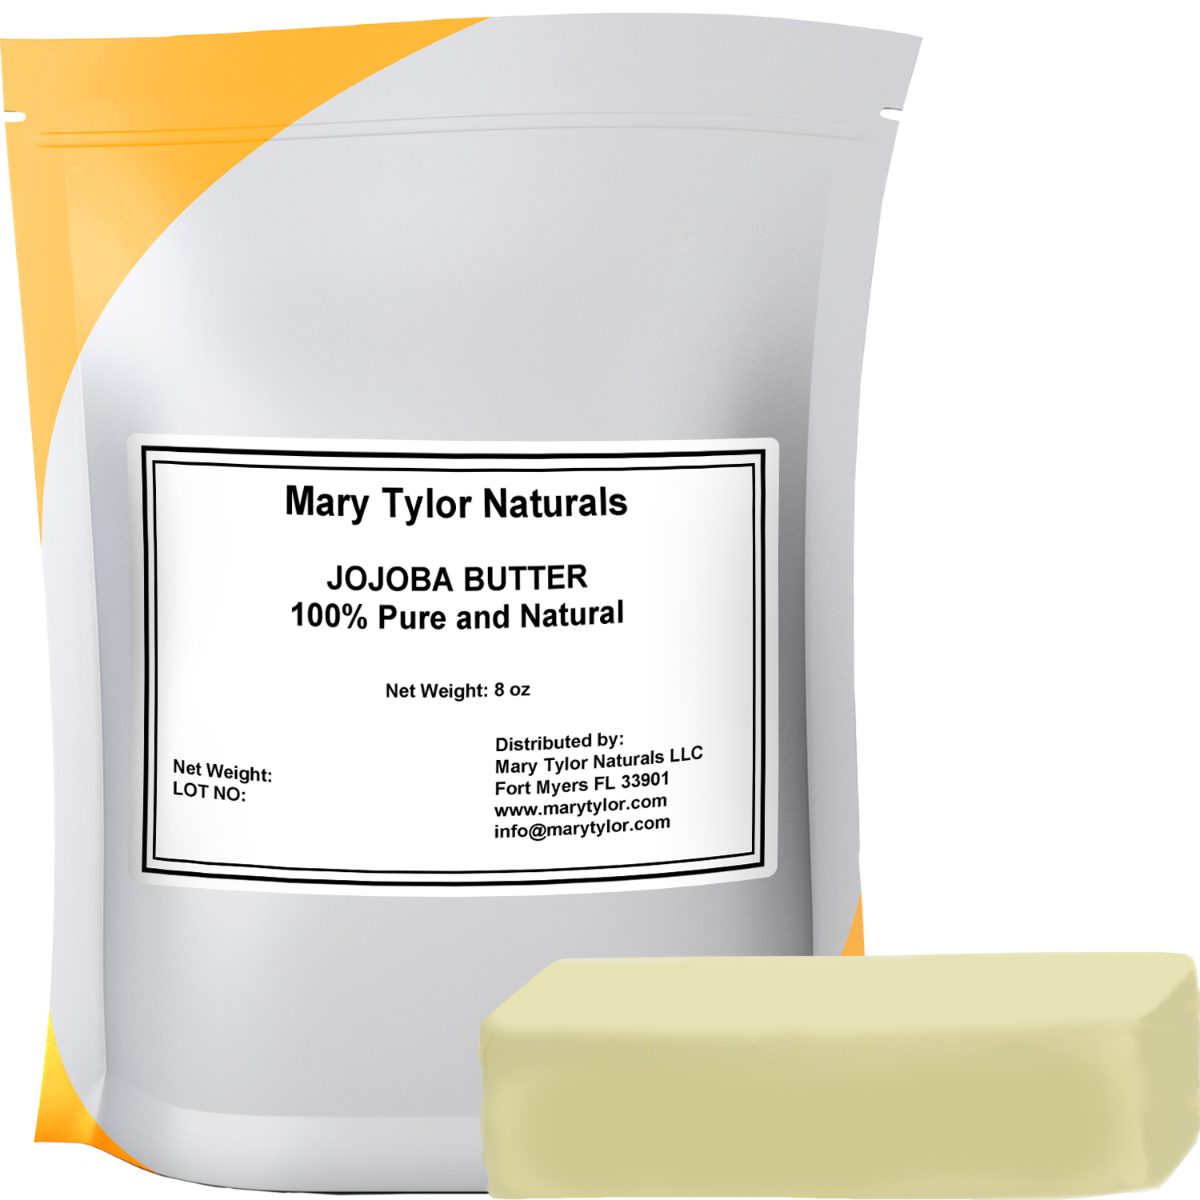 100% Pure and Natural Jojoba Butter 8 oz, Perfect for DIY Projects and Much More! By Mary Tylor Naturals, Unrefined Premium Grade - image 1 of 2